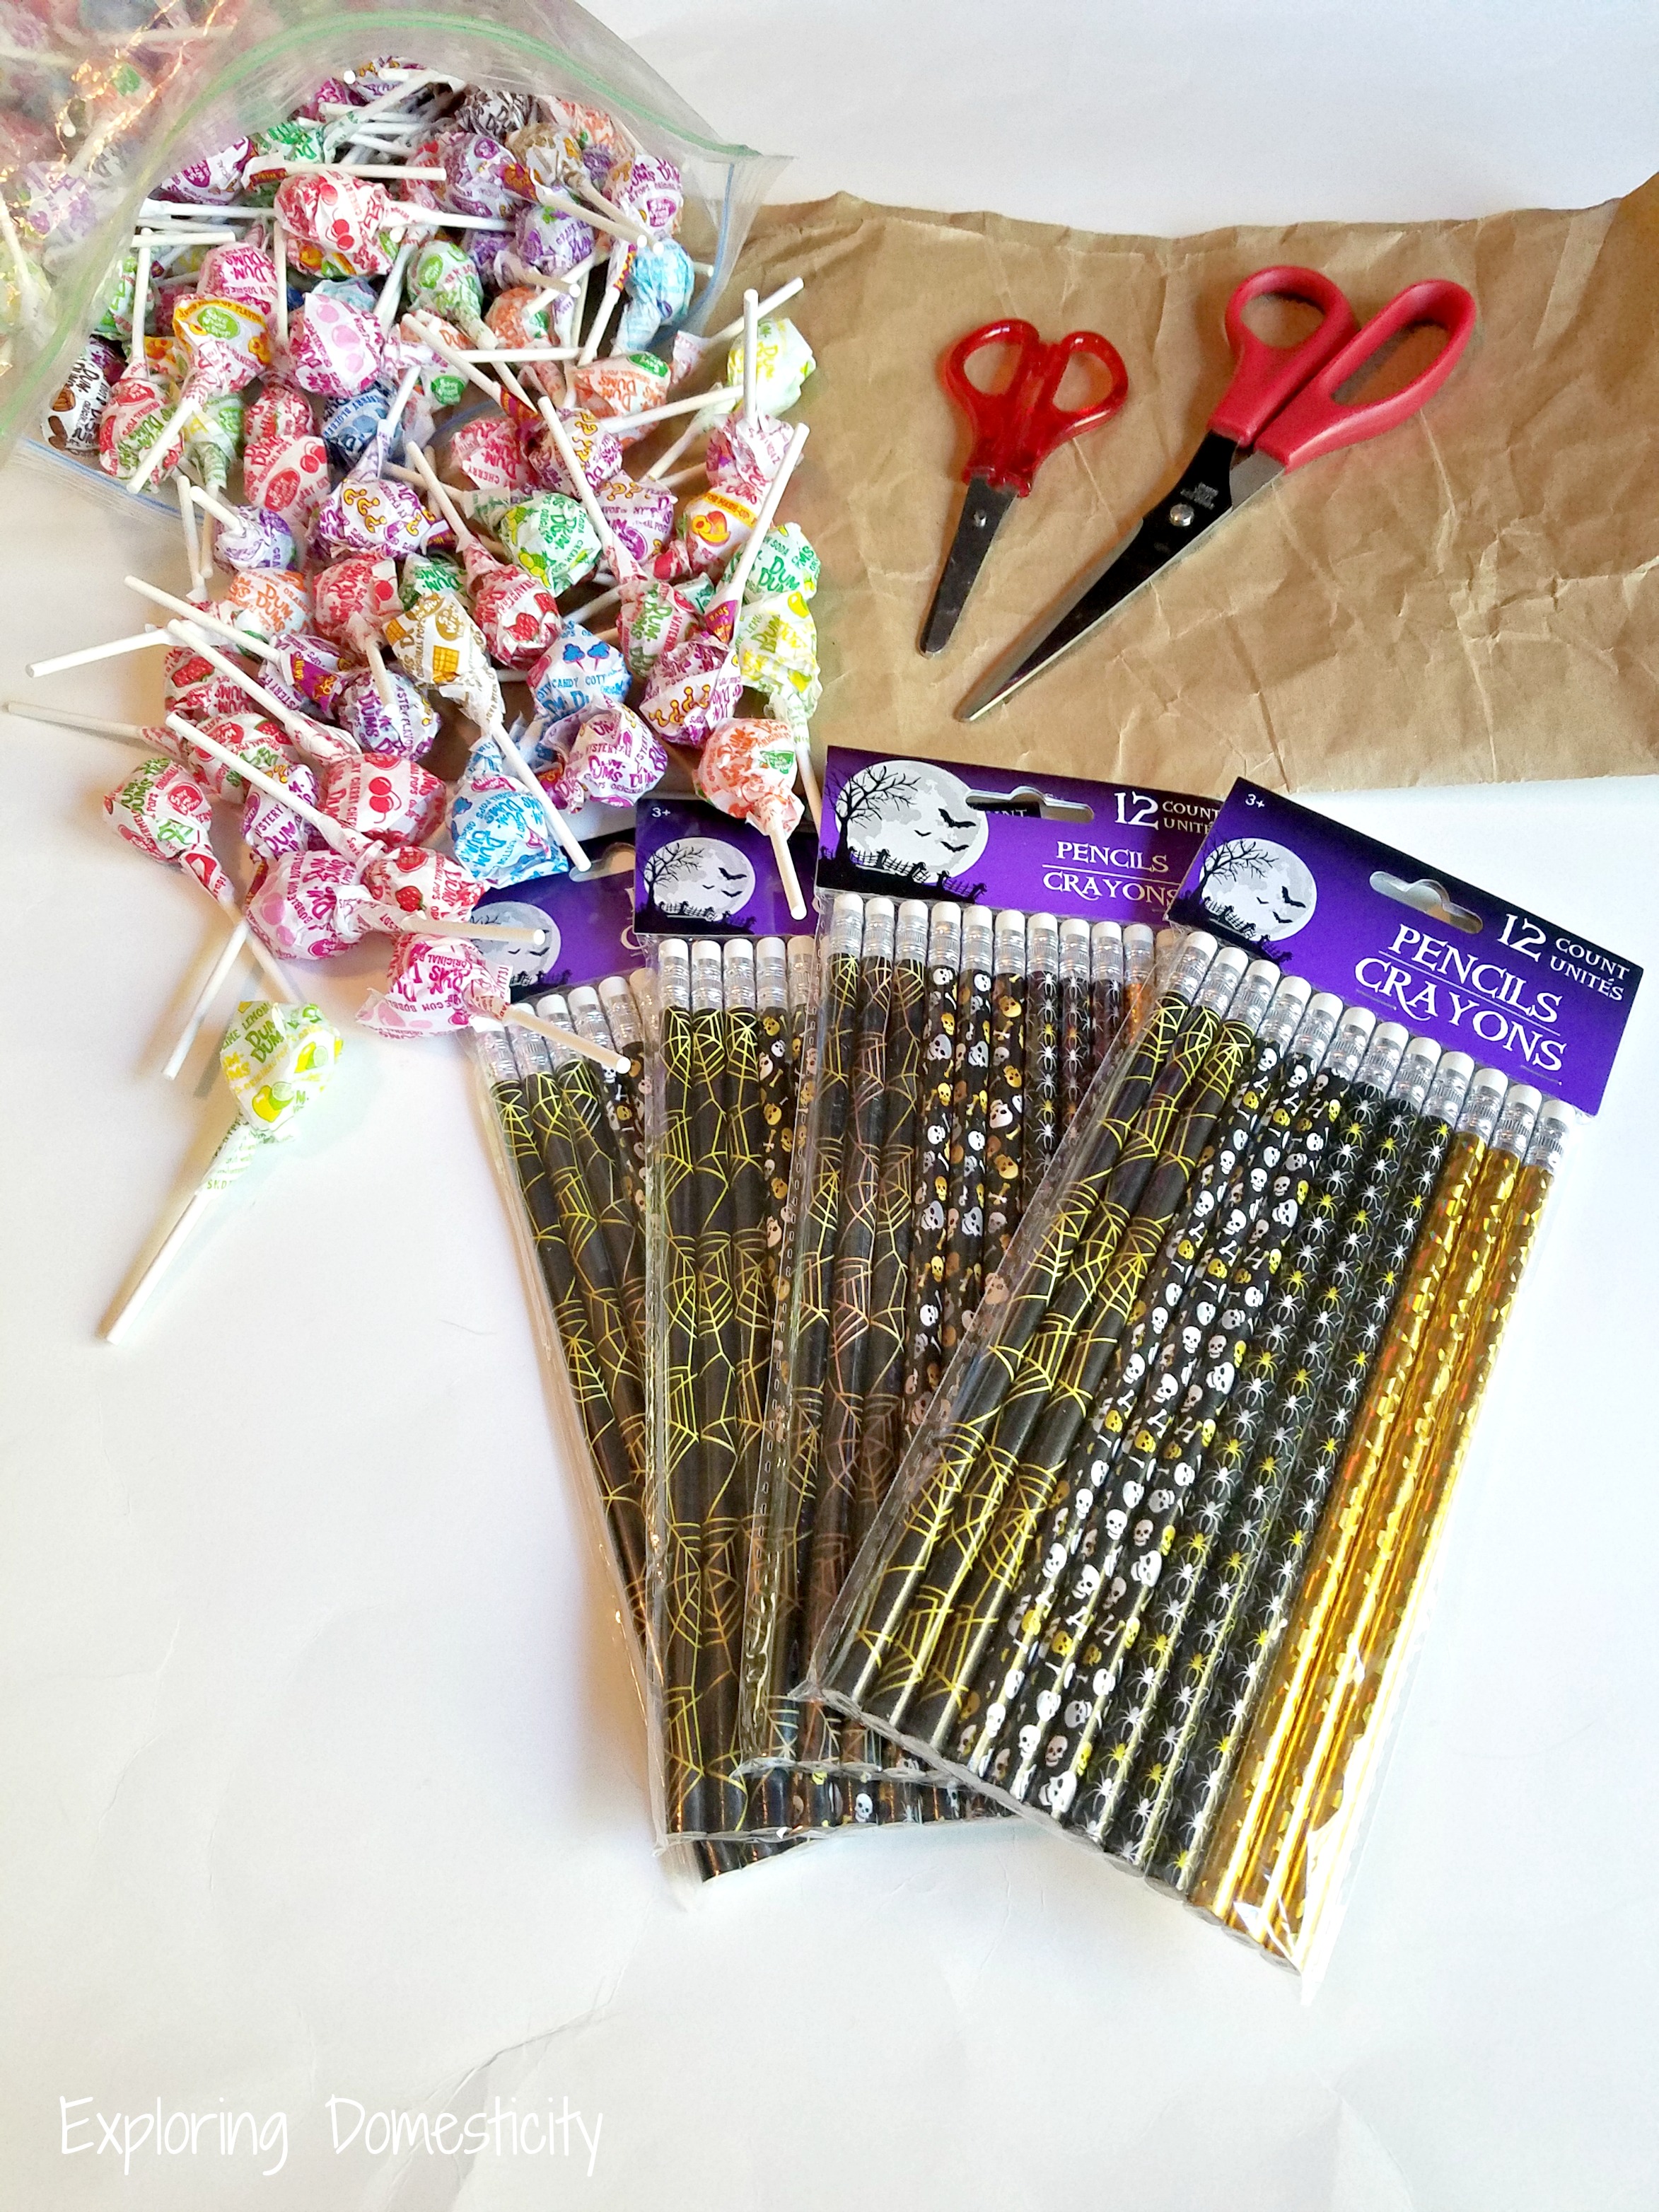  Witch Broom Pens for Halloween 24 Pack - Party Favors and  Classroom Giveaways : Childrens Drawing Pens : Office Products